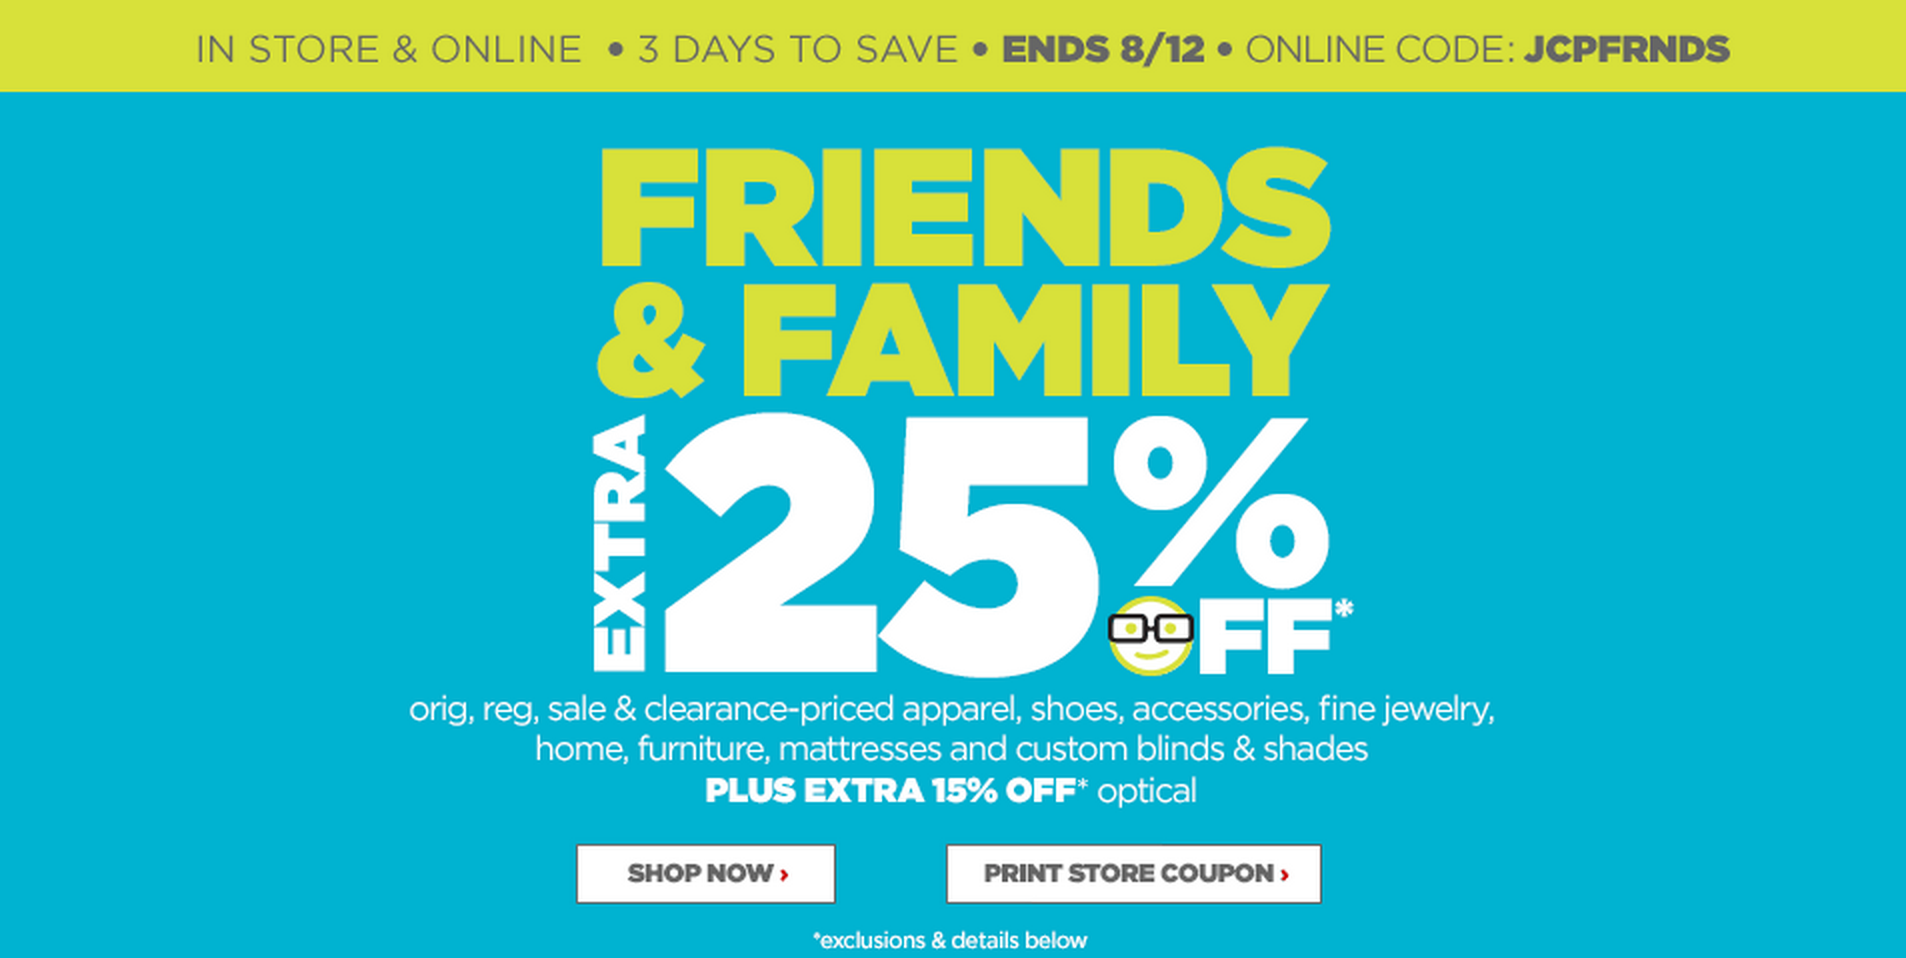 14 Ways to Save at JCPenney When Shopping Online or In-Store